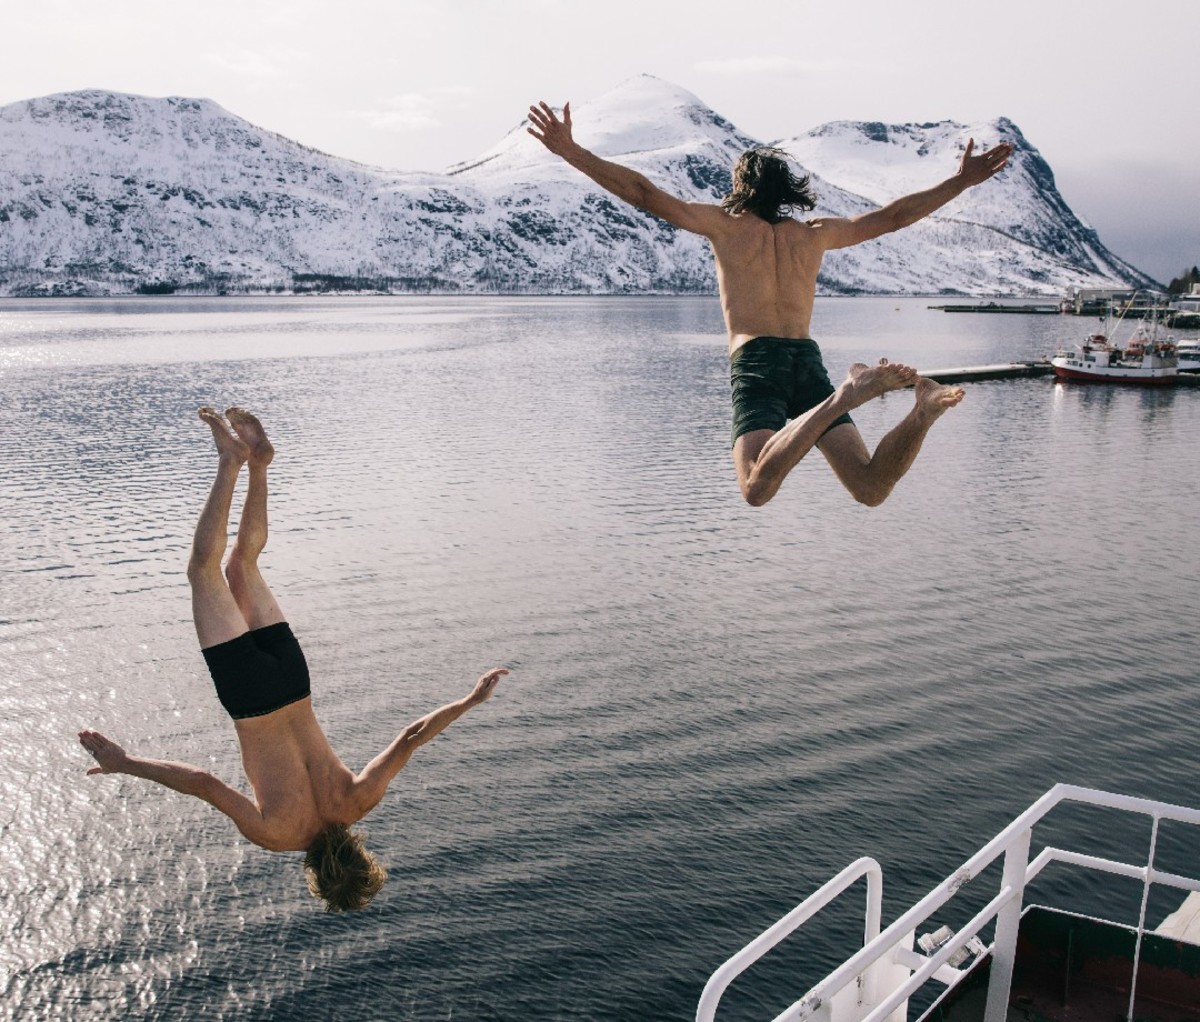 Two guys leaping into the coastal waters of Northern Norway from the vessel, with snowy hillsides in the background.